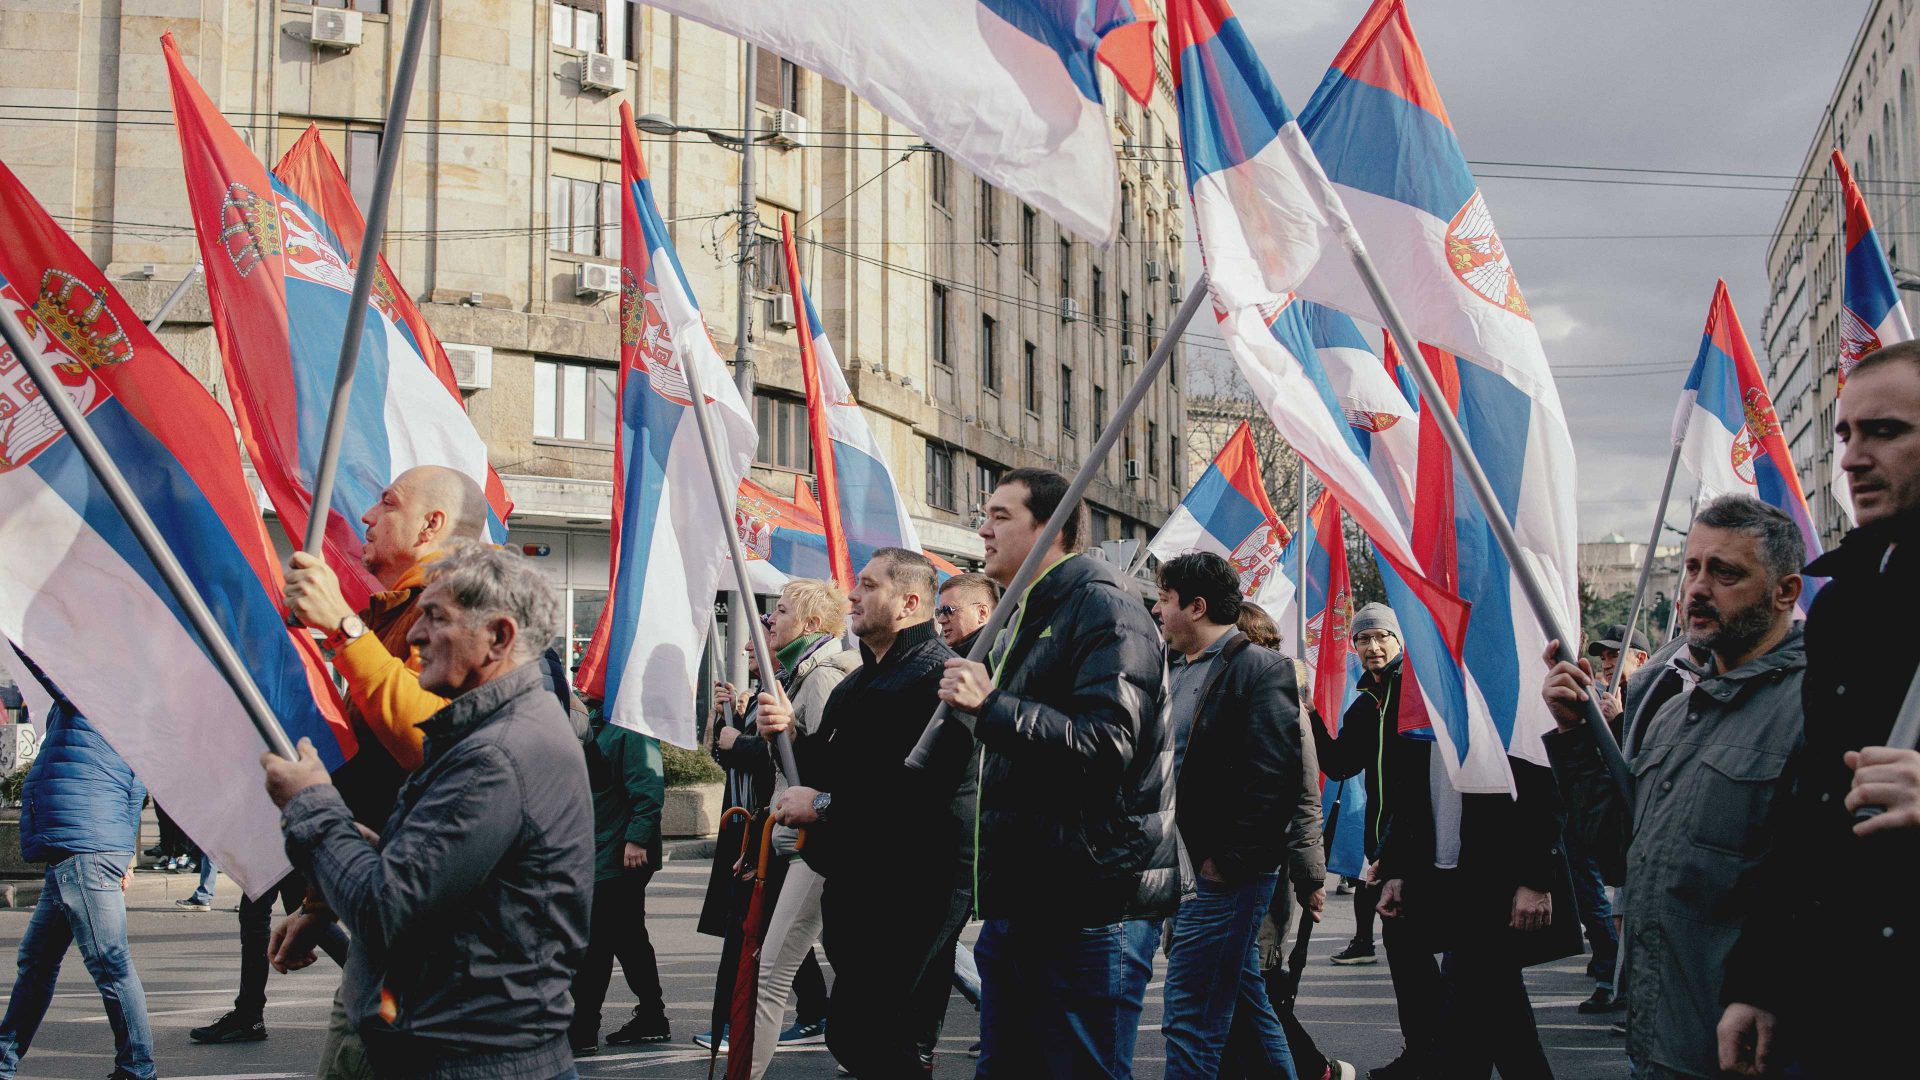 People wave Serbian flags, as they attend a protest organised by ProGlas. Photo: Vladimir Zivojinovic/Getty Images